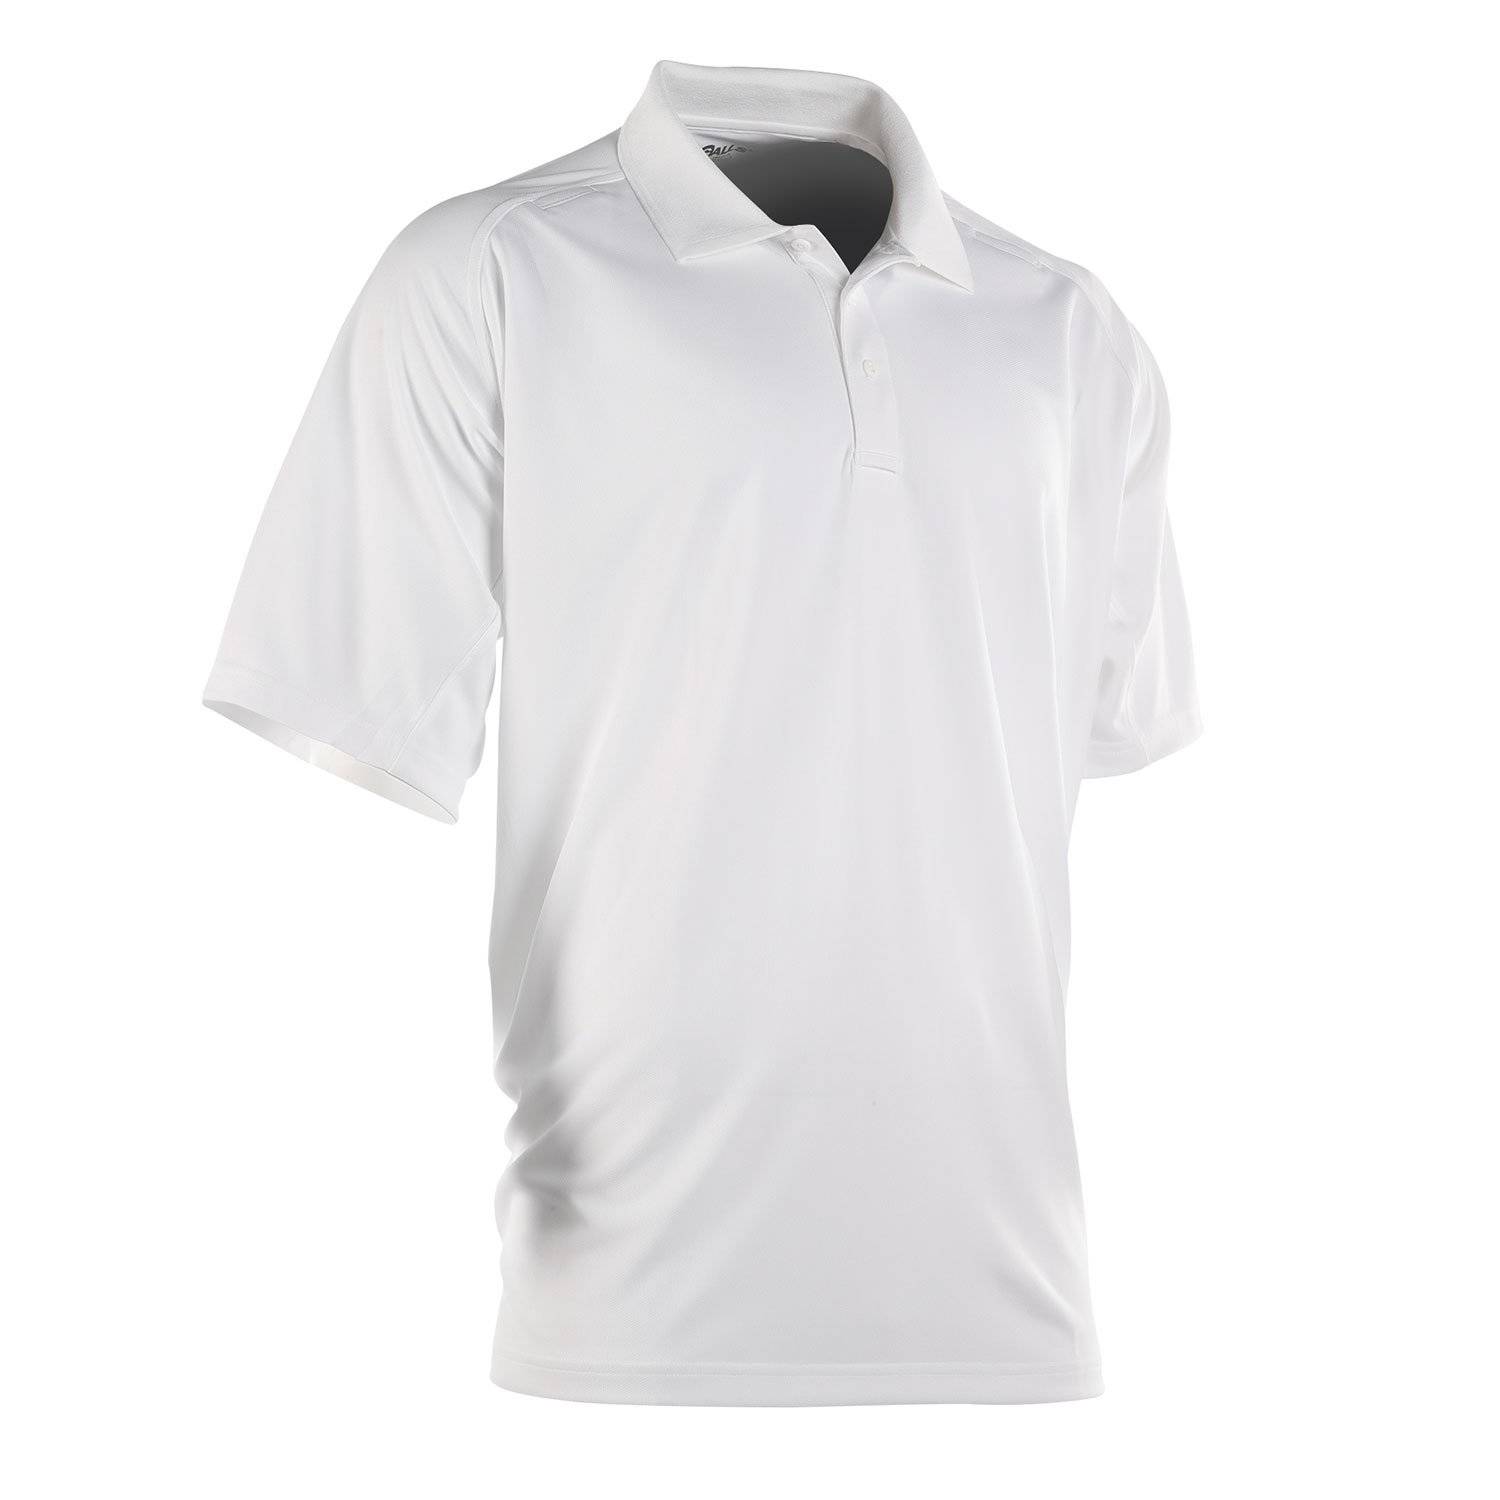 Galls Short Sleeve Tac Force Mesh Polo